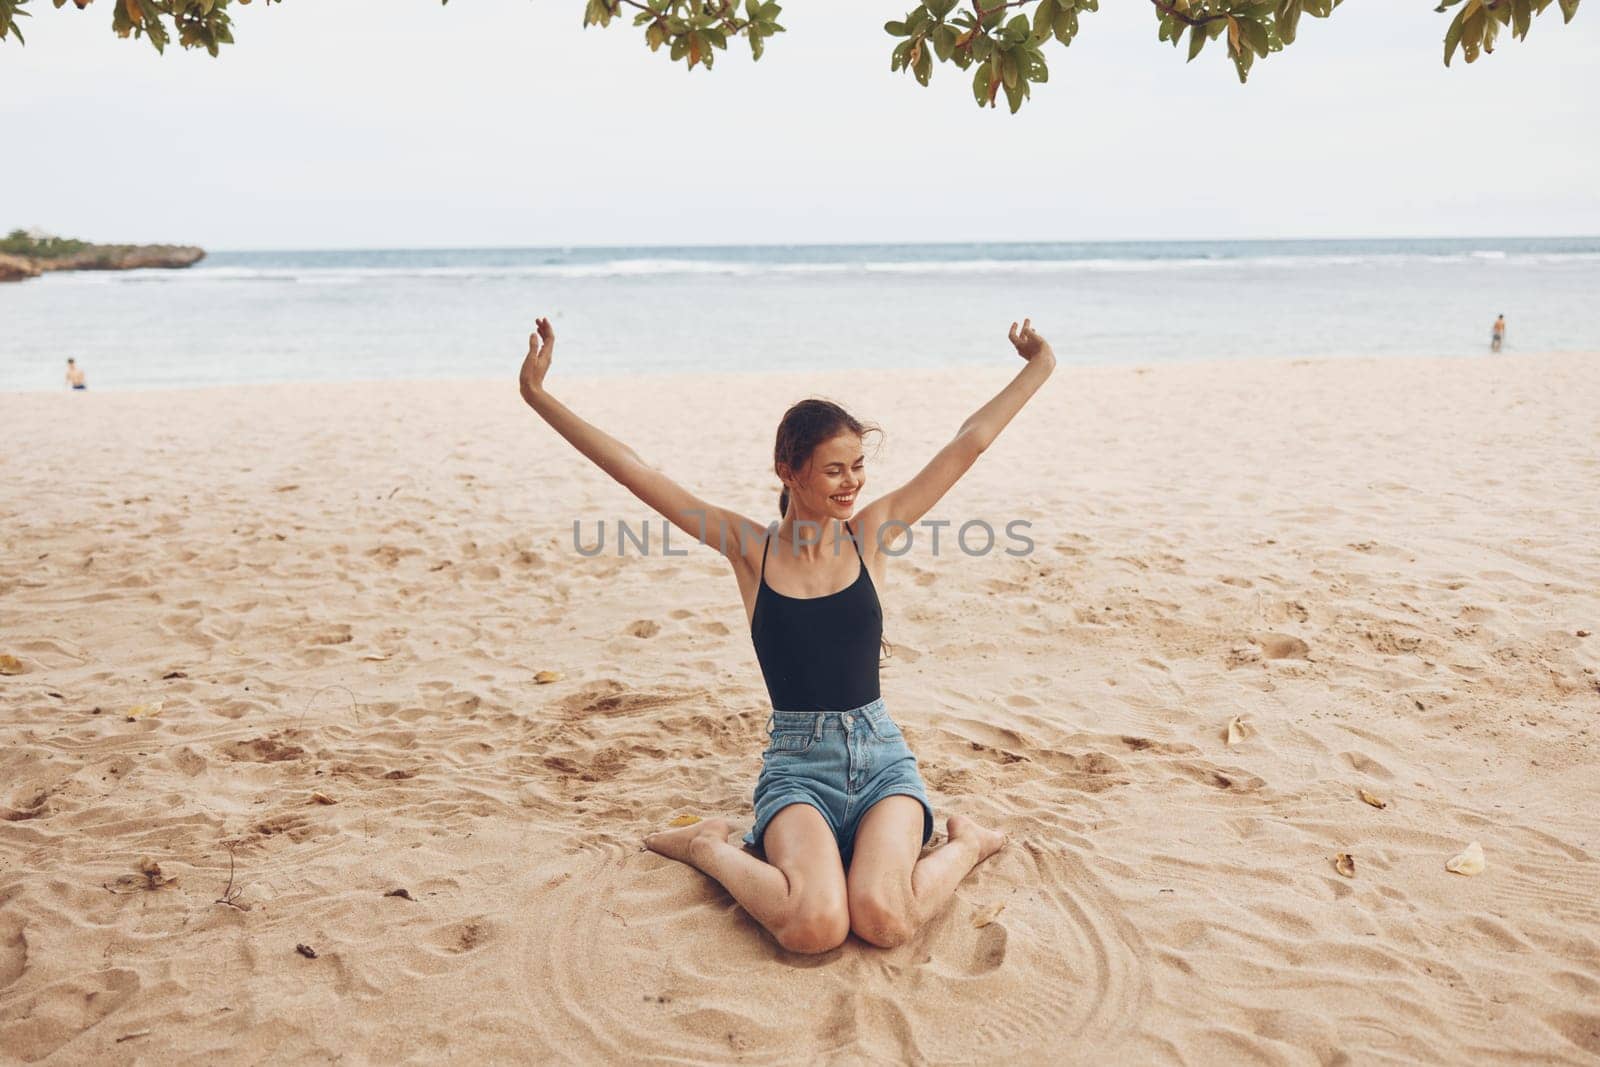 beach woman sitting vacation sand freedom smile nature sea beauty travel by SHOTPRIME